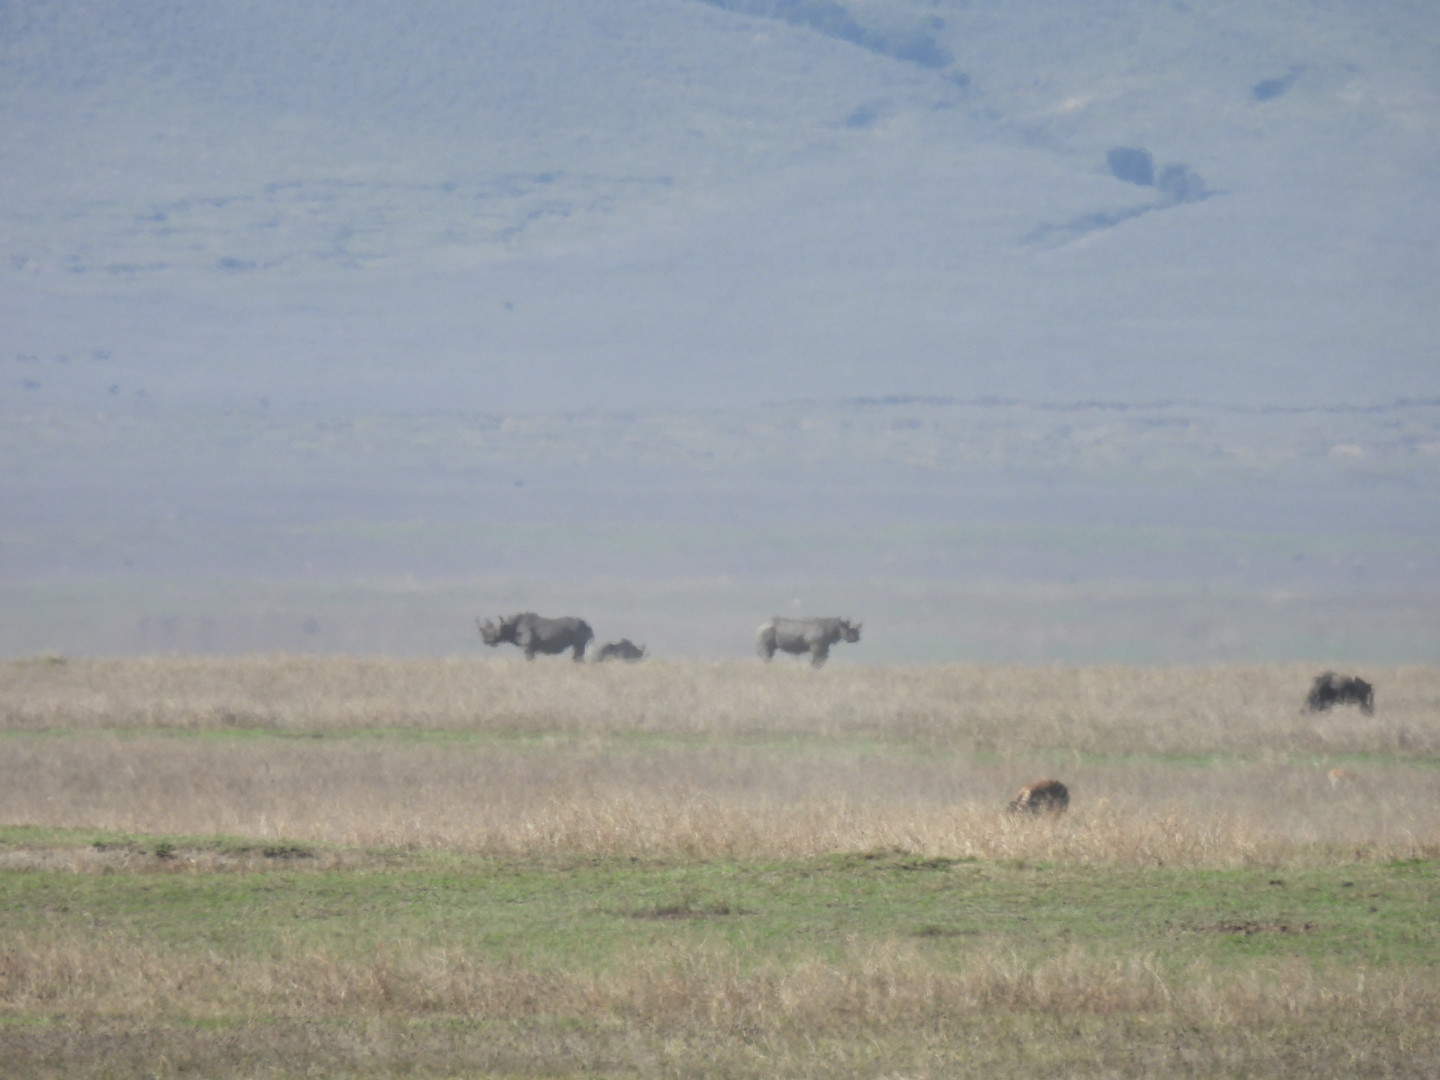 The Black Rhino is one of the animals in the Ngorongoro Crater